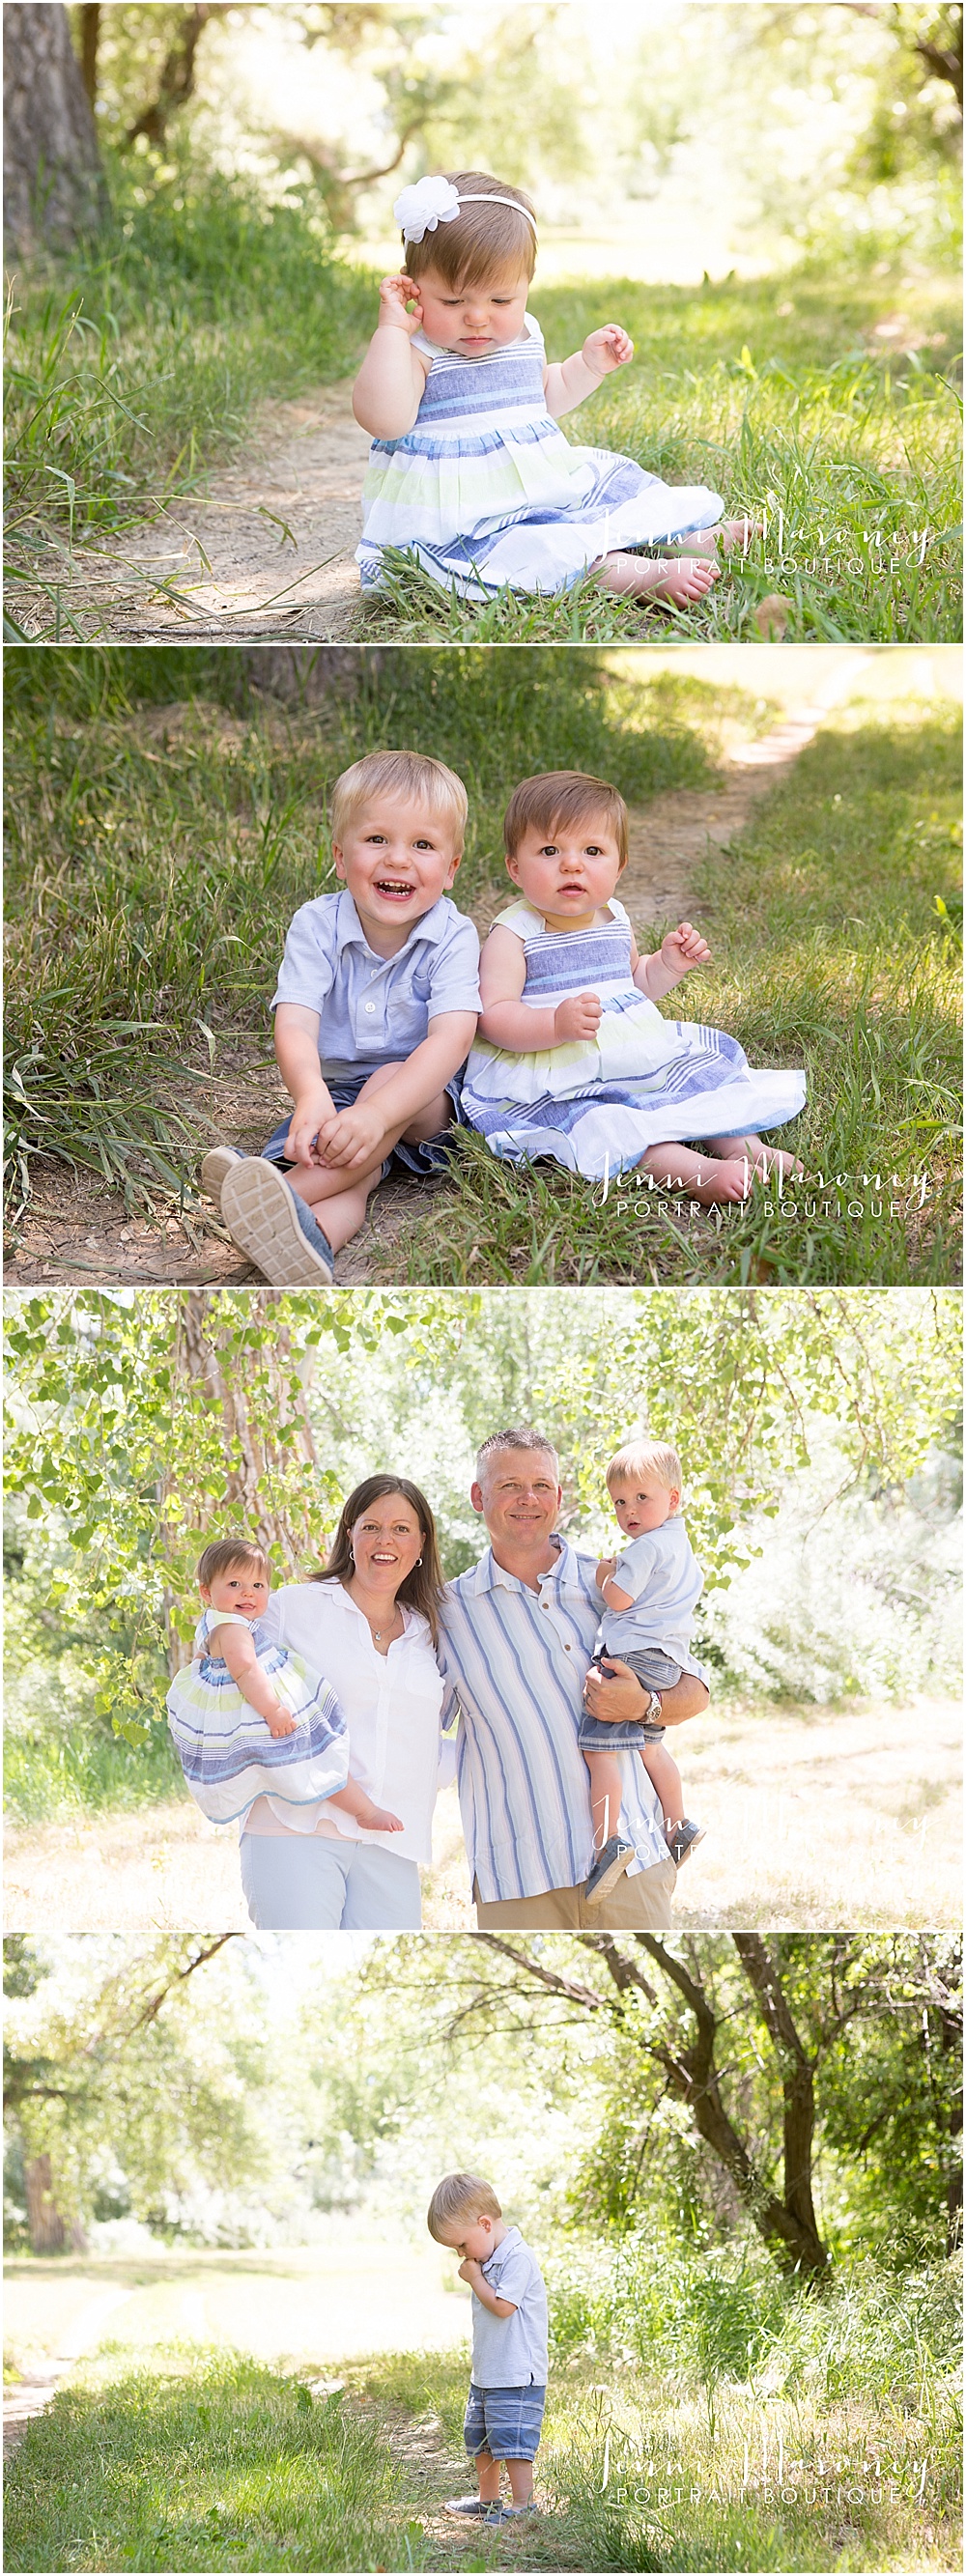 Denver newborn photographer and Boulder children's photographer shares an outdoor baby's first year 8 month photo session